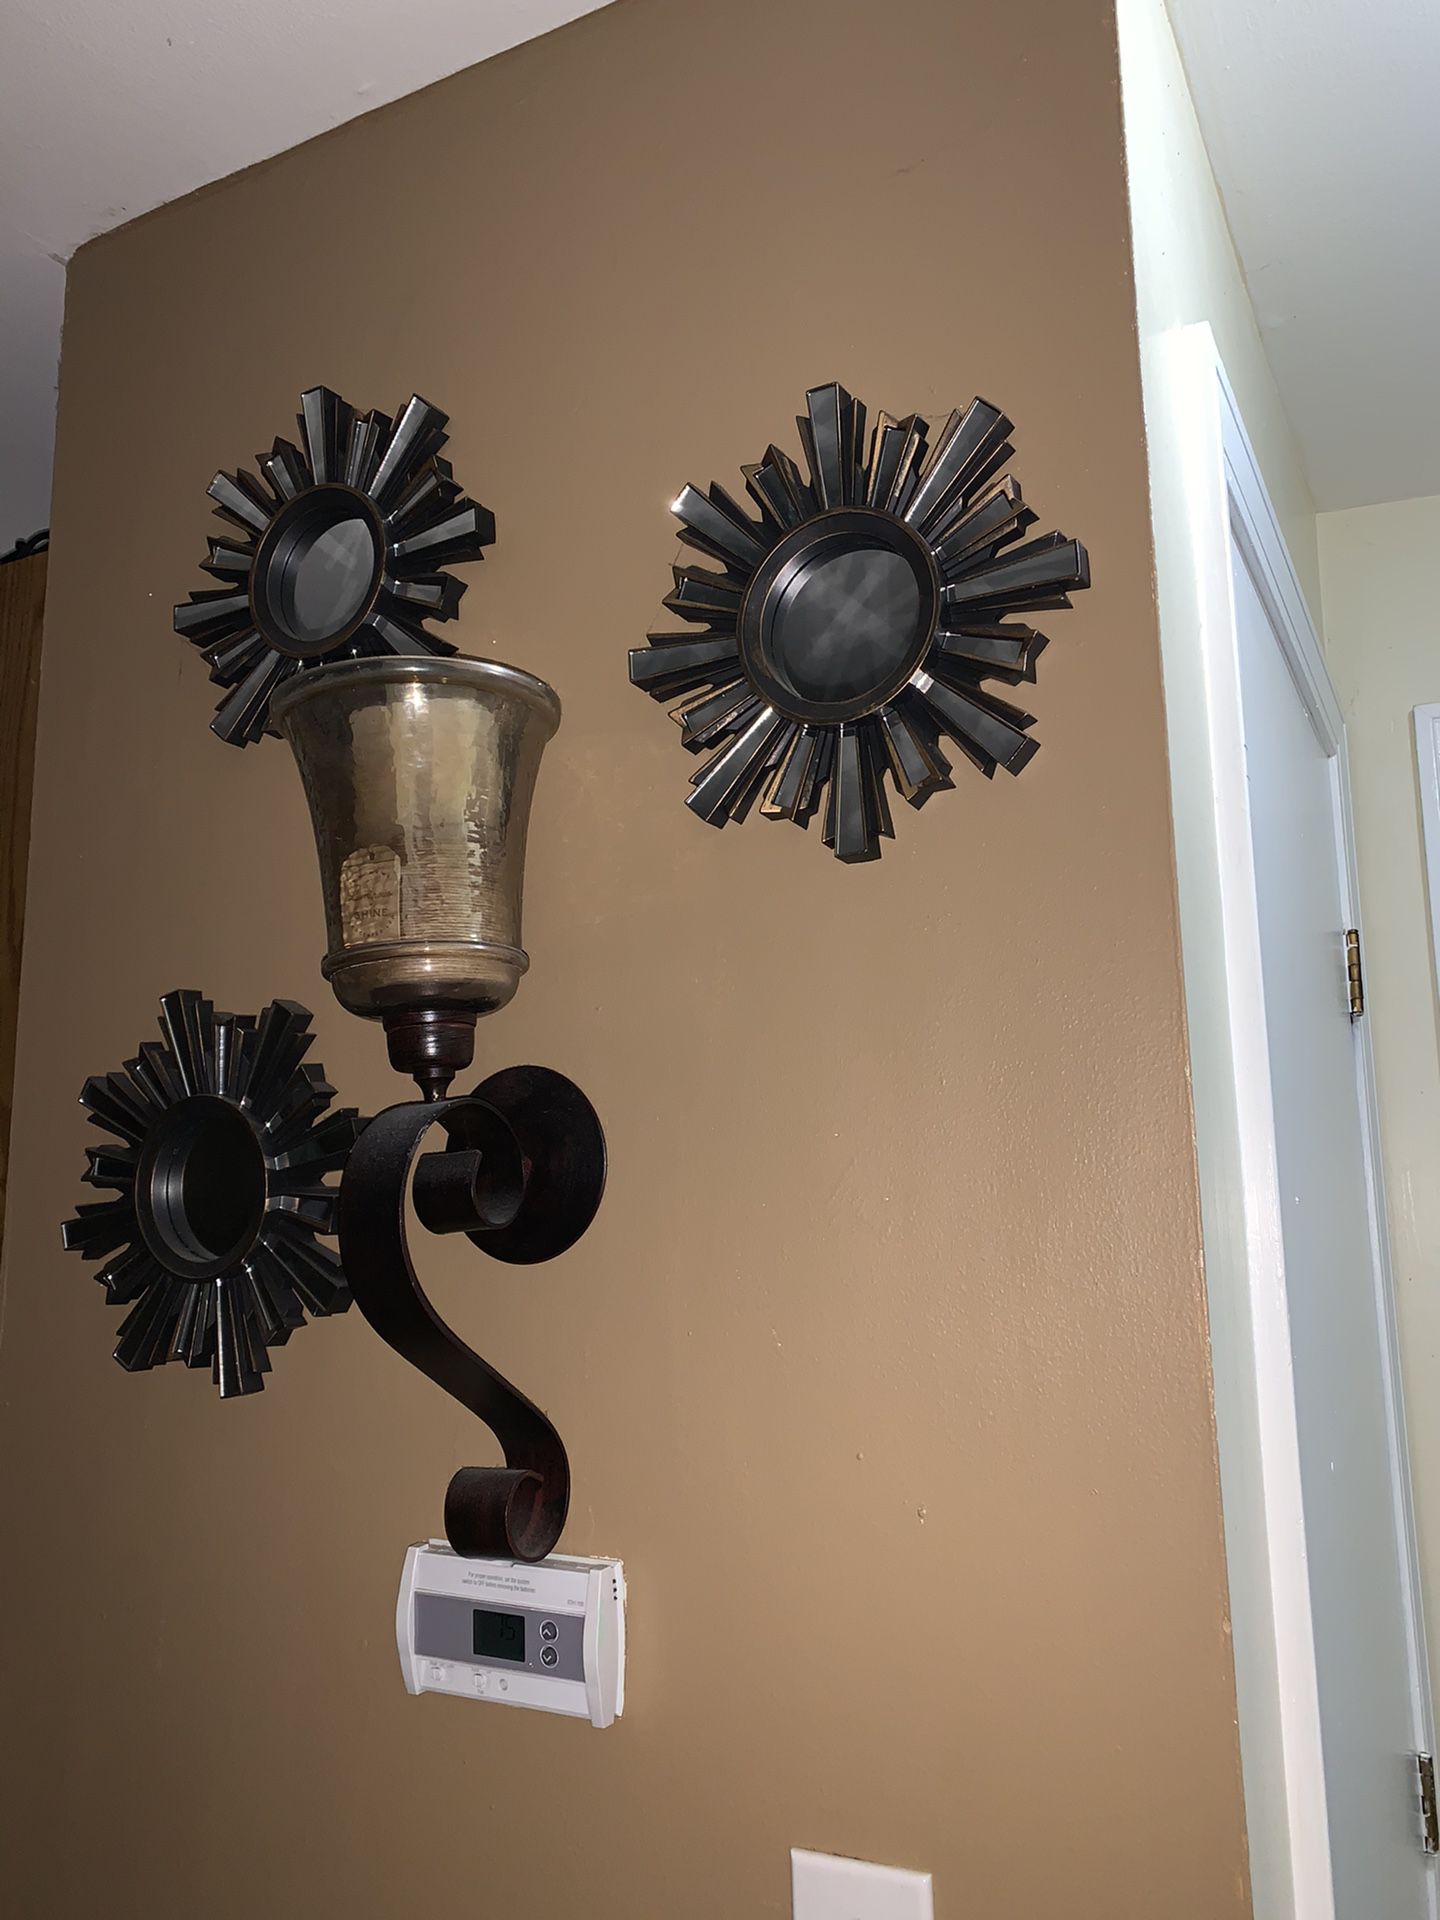 1 wall sconce & decorative mirrors